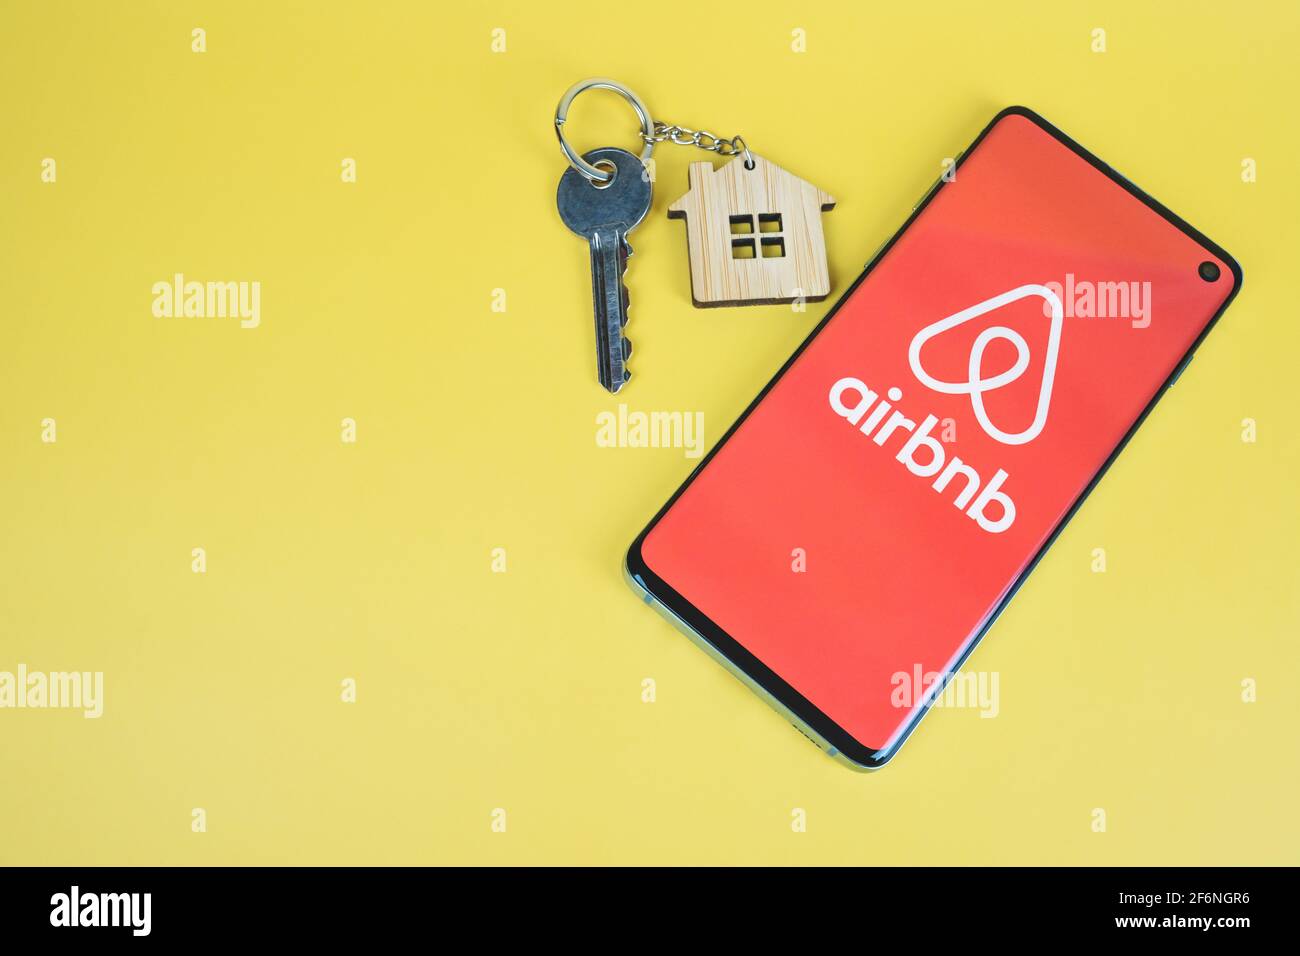 SWANSEA, UK - MARCH 31, 2021: Airbnb app logo displayed on smartphone, home key with house keyring on yellow background with copy space Stock Photo